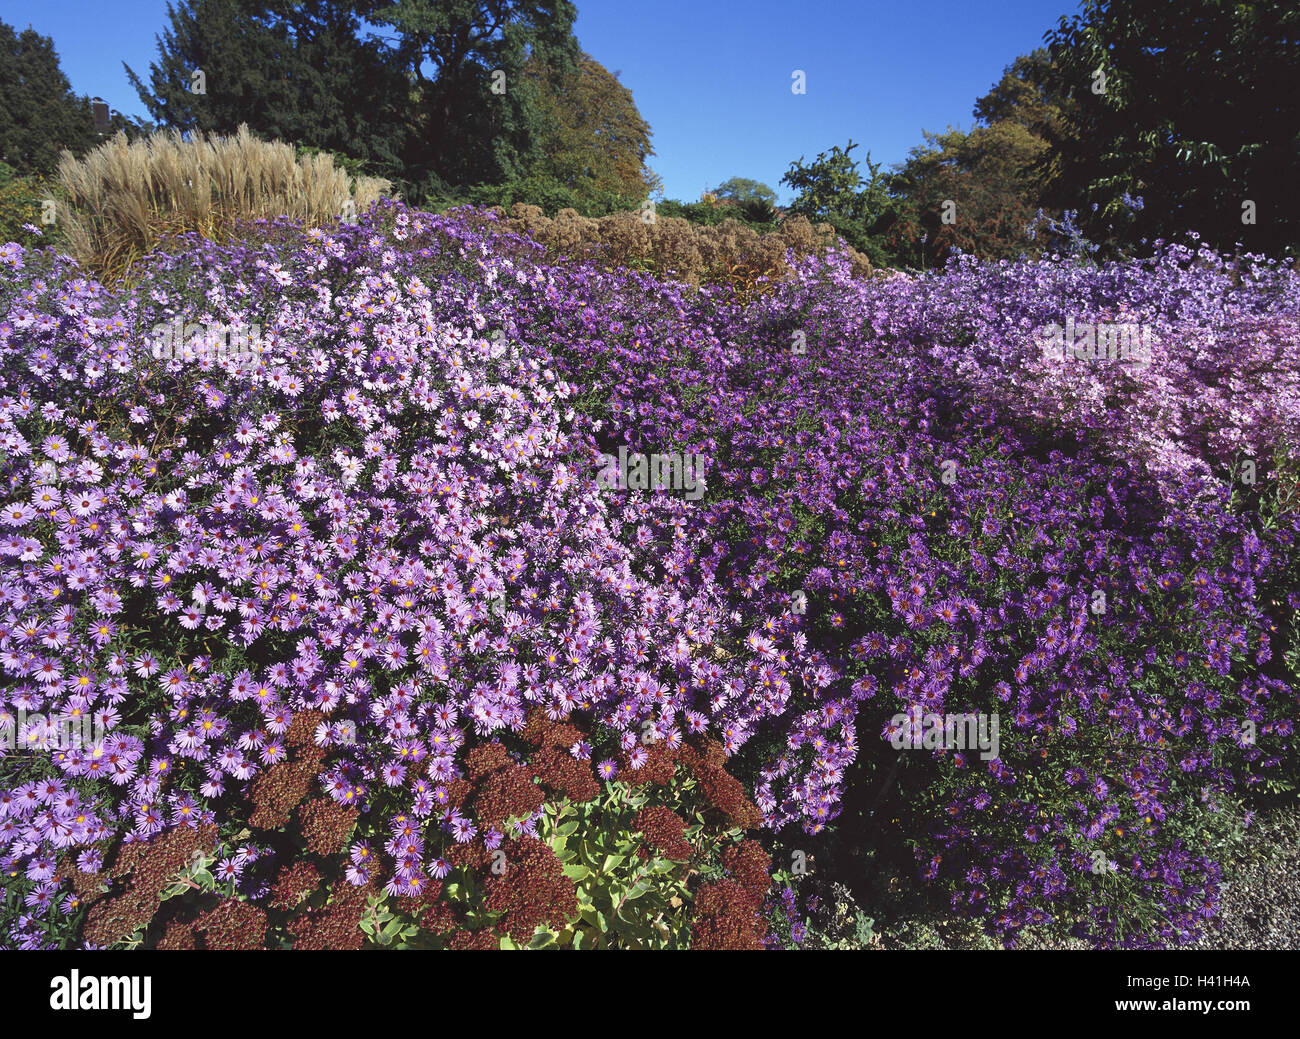 Garden, blue autumn asters, Dendranthema spec., autumn chrysanthemums, winter asters, chrysanthemum, plants, flowers, botany, mountain aster, aster amellus, blossoms, mauve Stock Photo